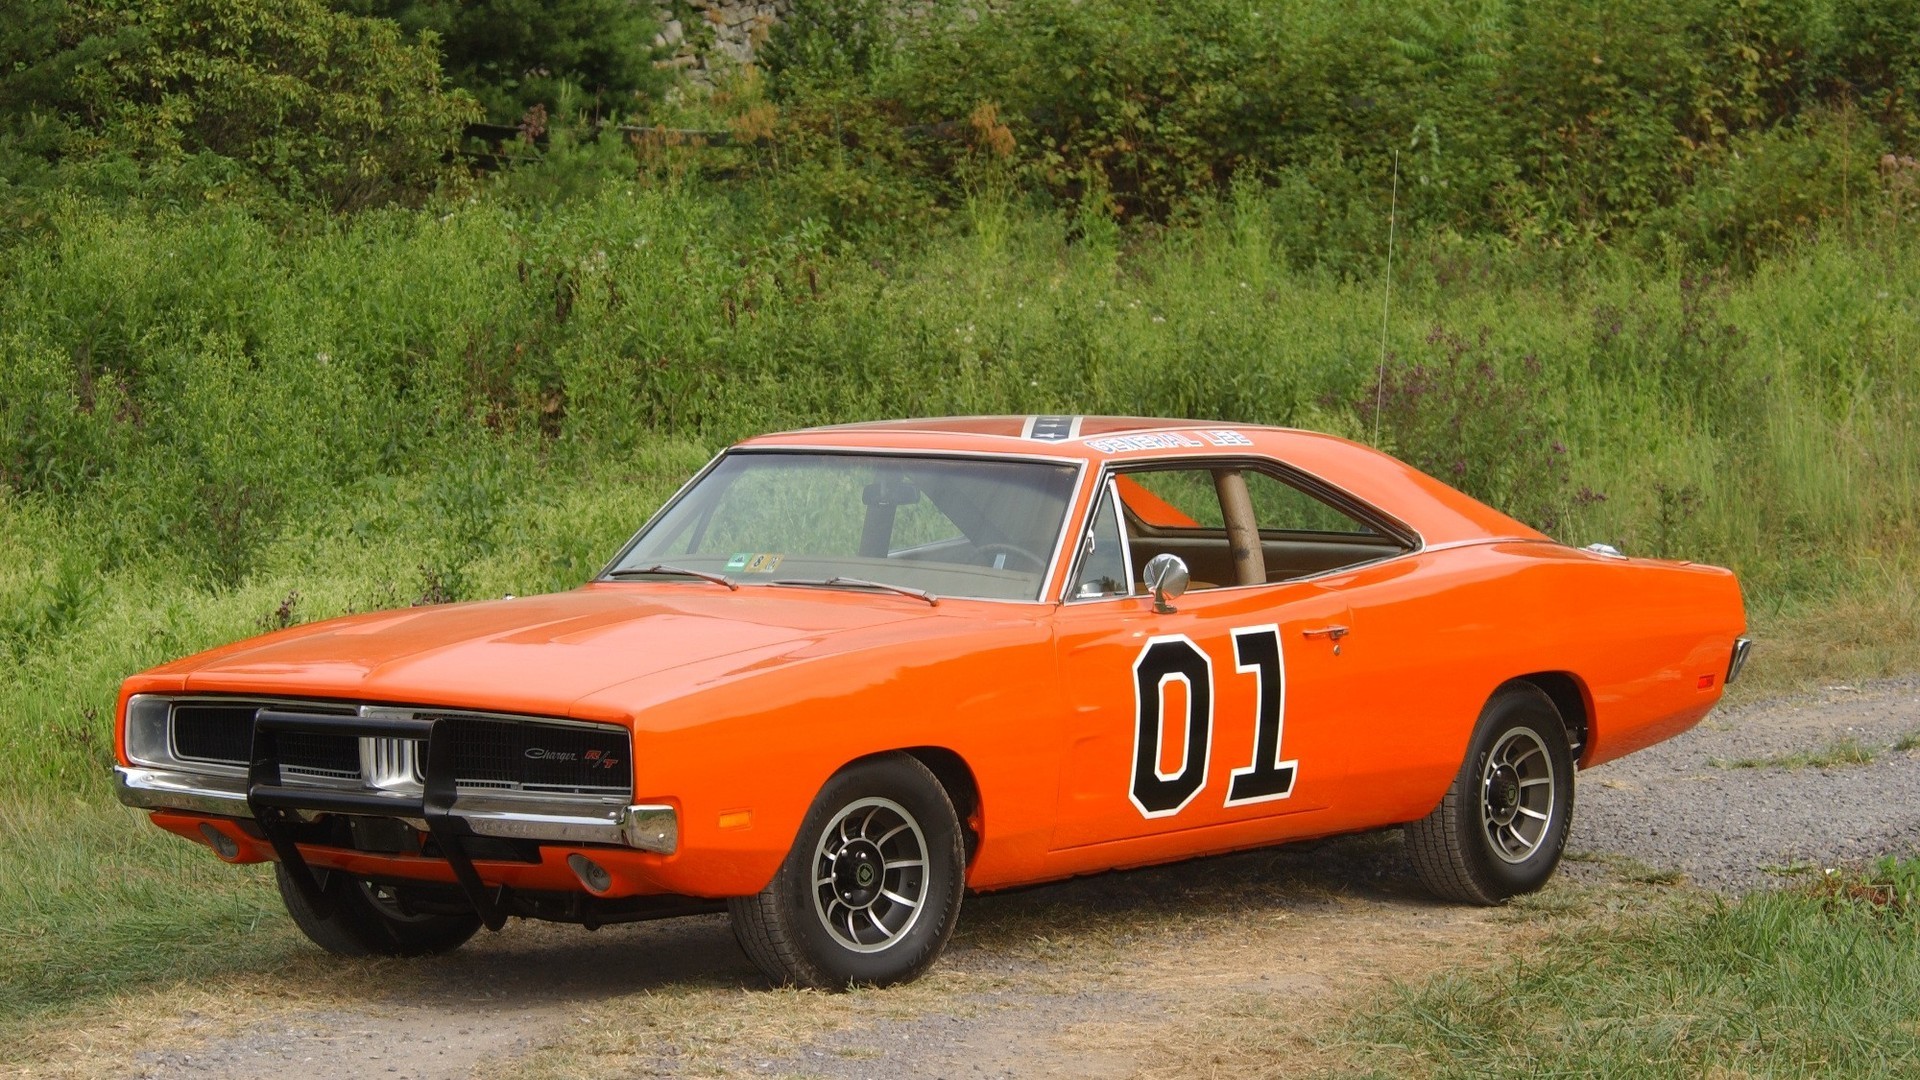 1920x1080 0 1080x1920 Cars dodge charger dukes of hazzard general lee wallpaper  (100011)  Dodge Charger 1969 General Lee wallpaper 